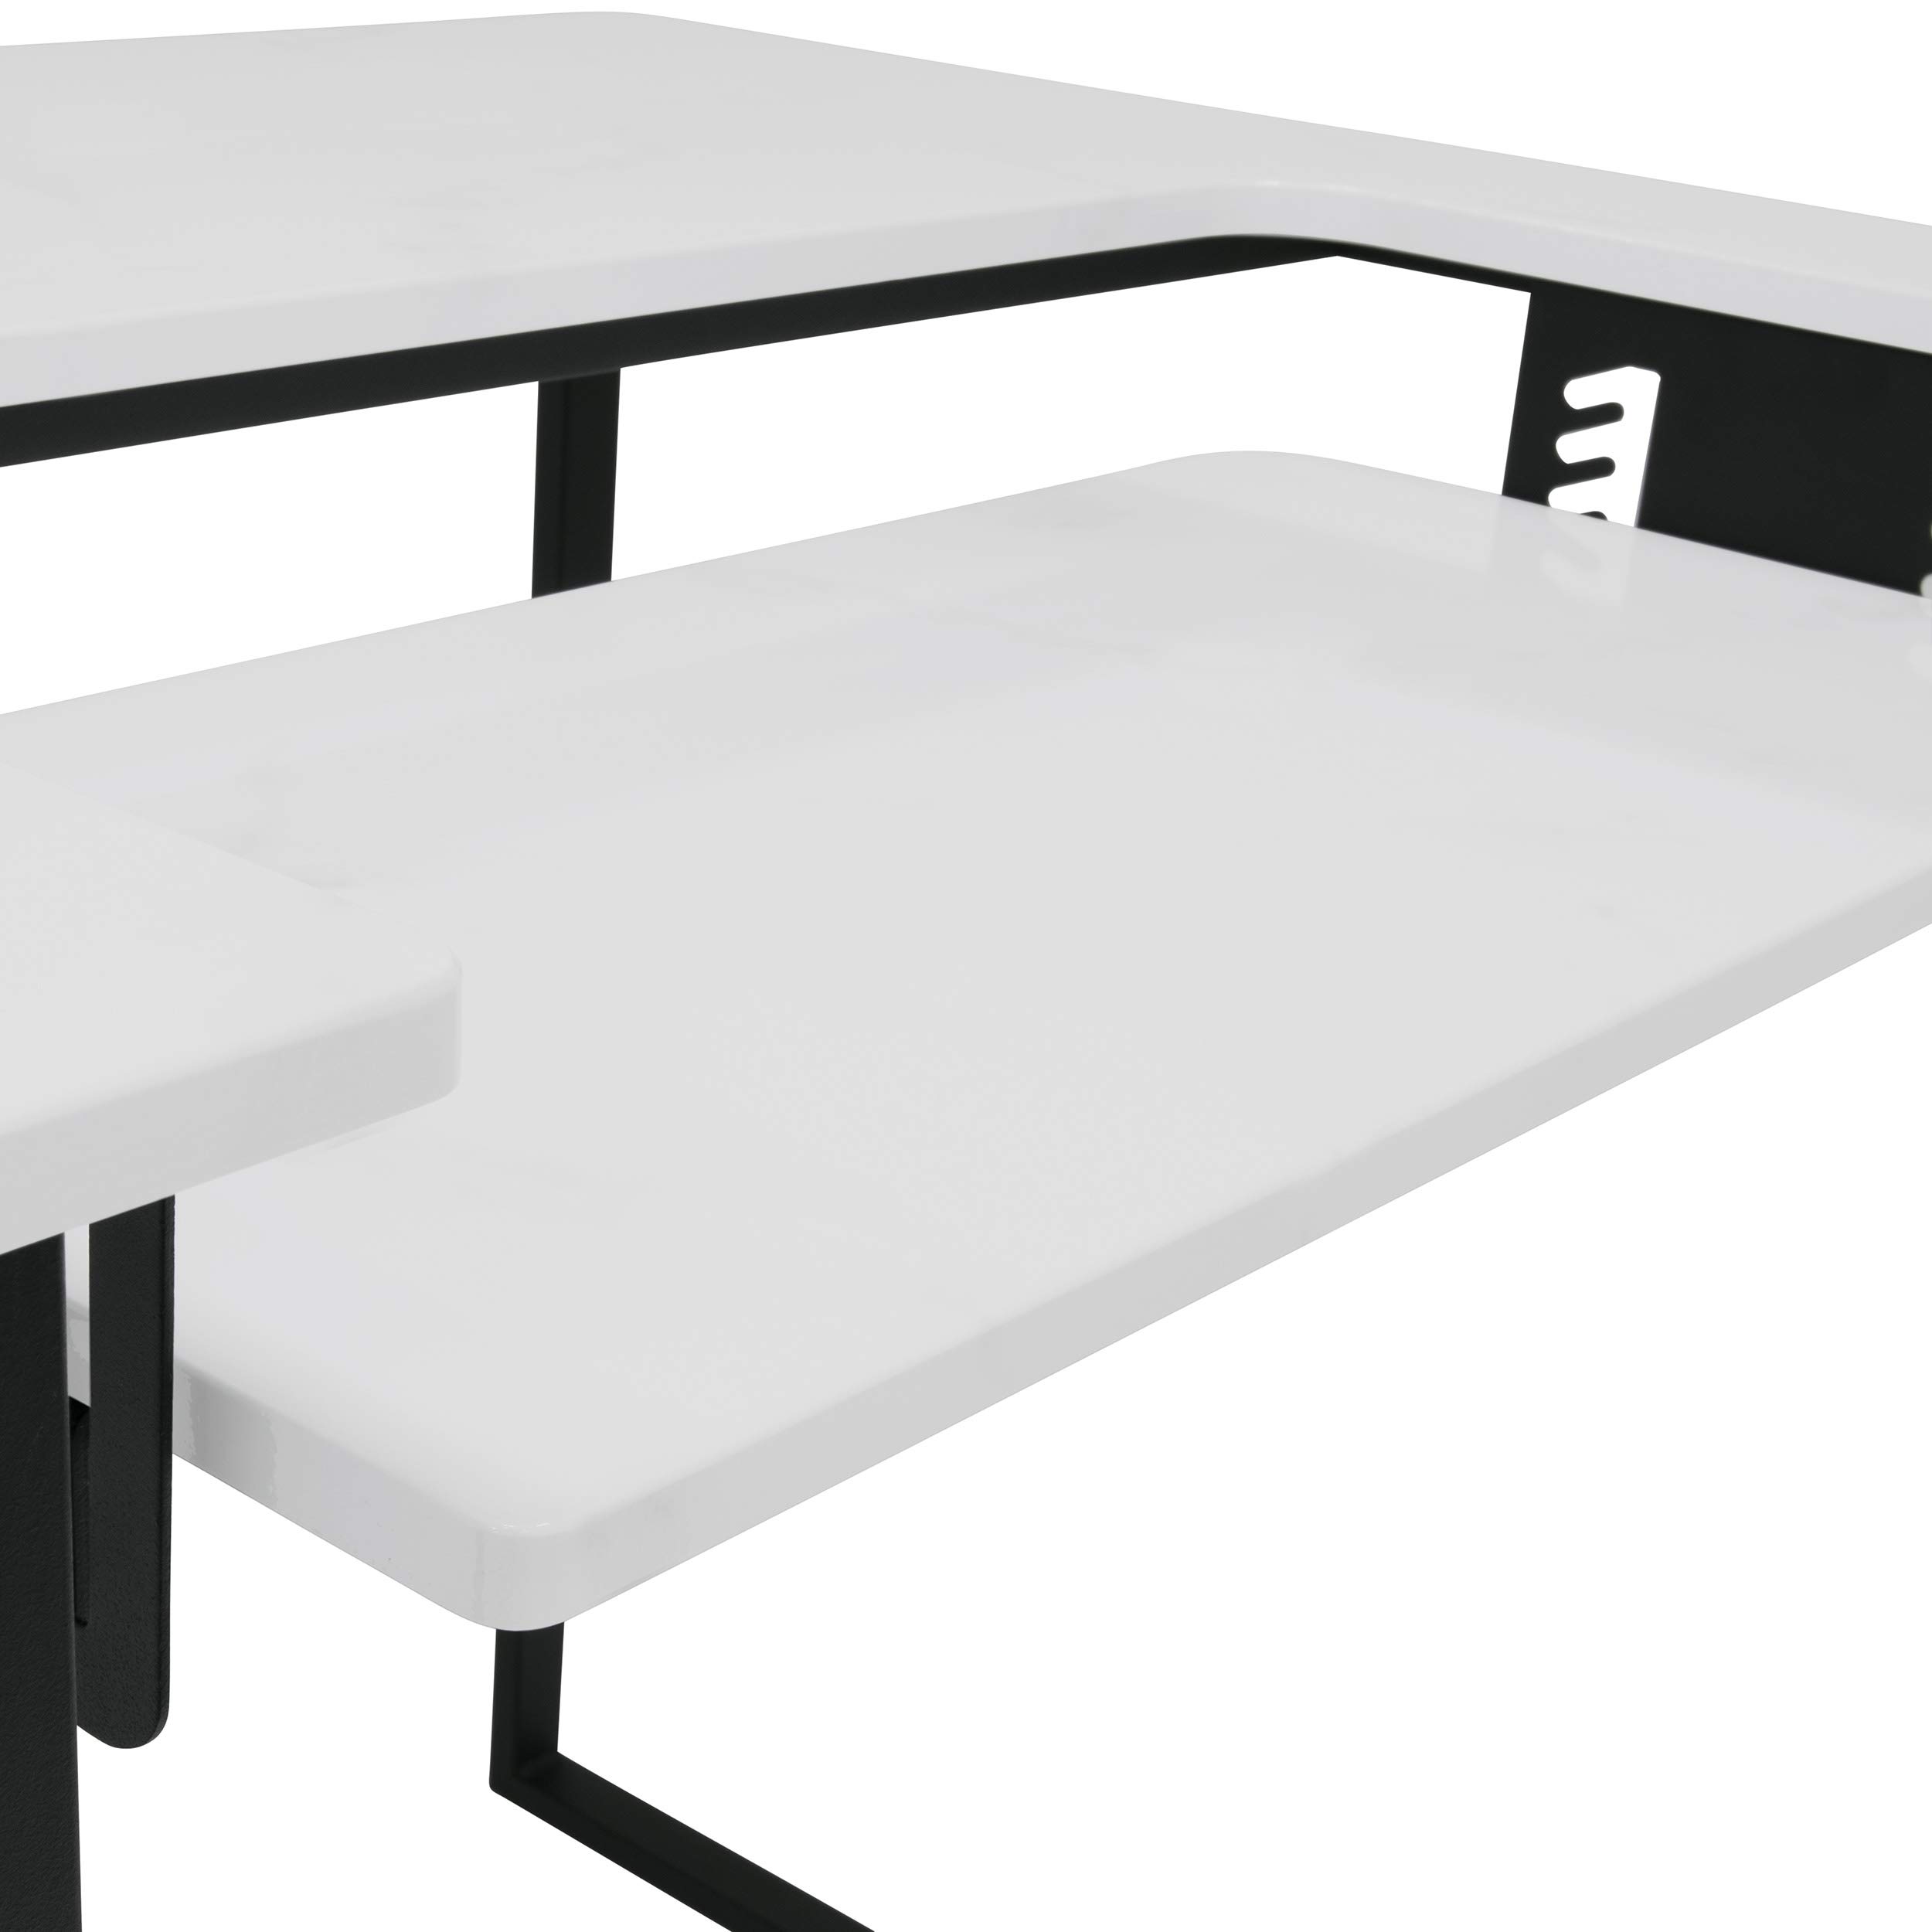 Sew Ready Dart Wood/Metal Multipurpose Machine Table Workstation Desk with Folding Top for Crafts, Sewing, Computers, Laptops, Games, Black Graphite/White 23D x 41W x 30H in